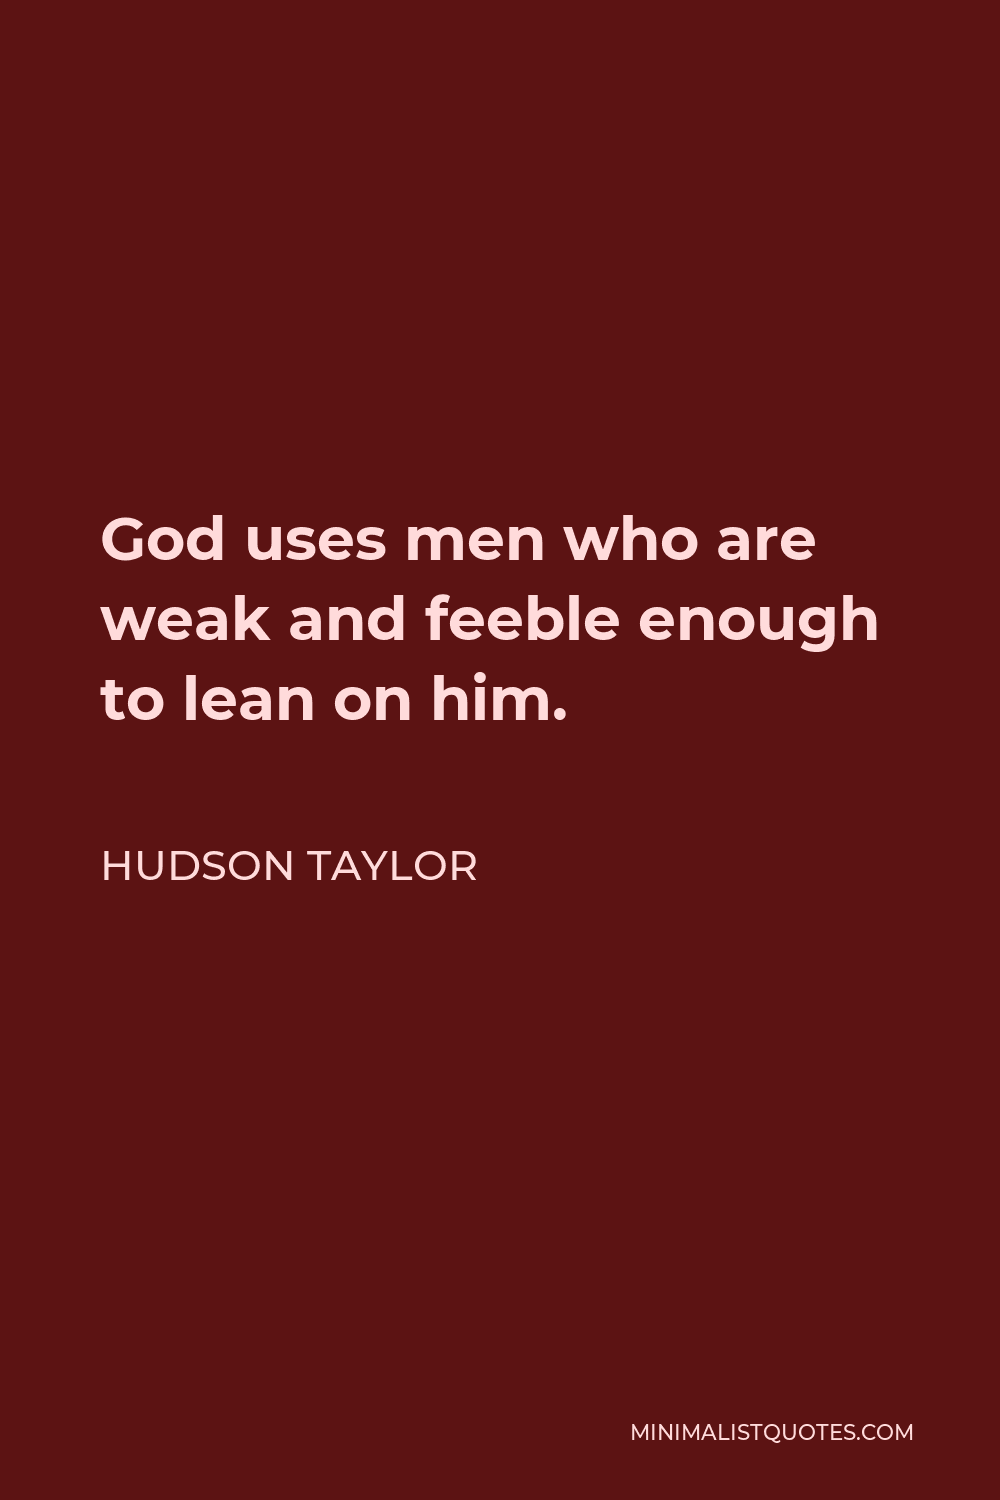 Hudson Taylor Quote - God uses men who are weak and feeble enough to lean on him.